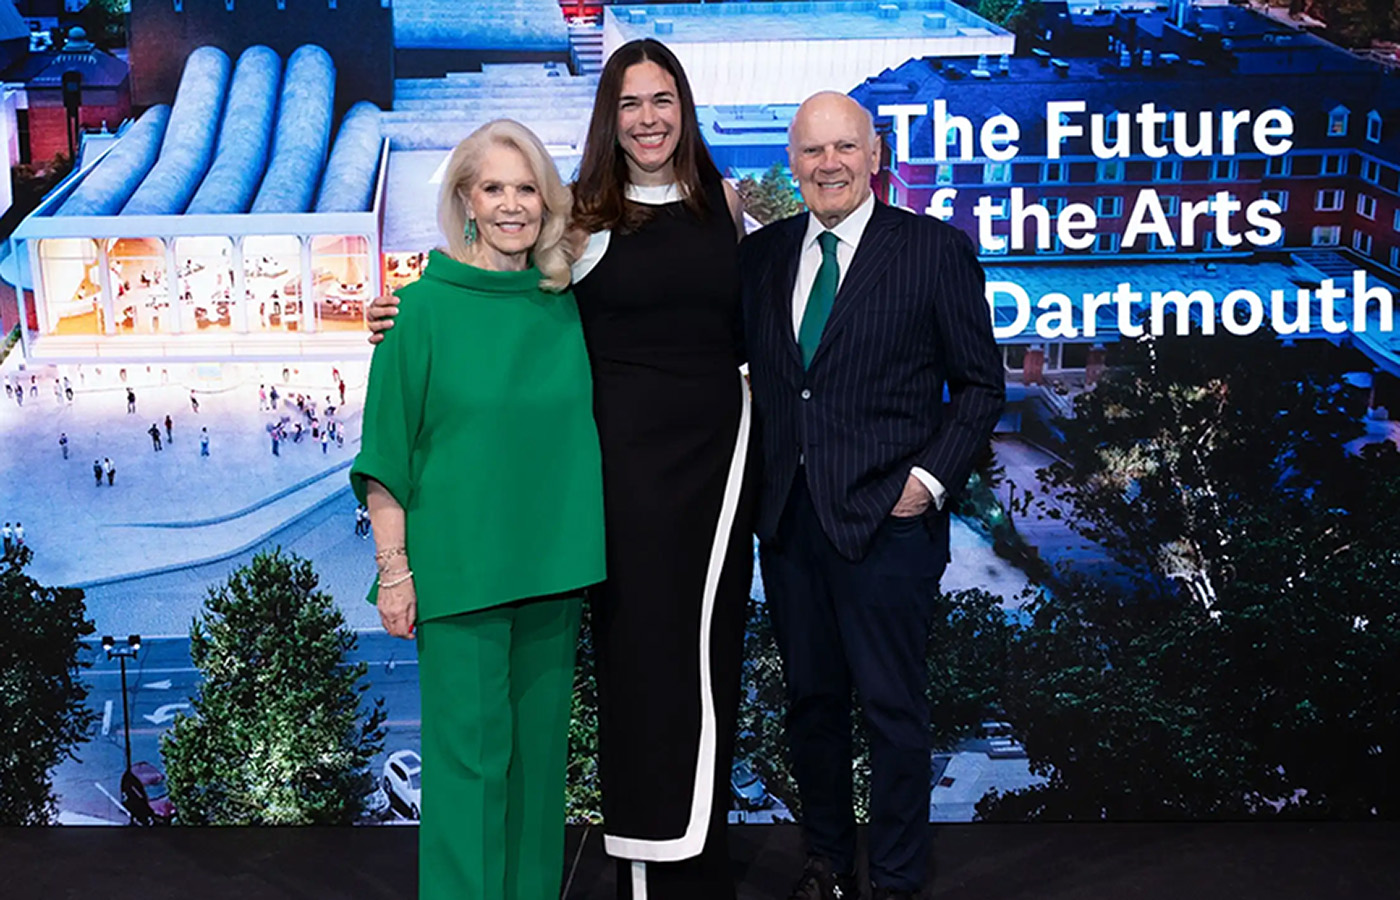 Daryl Roth, President Sian Beilock, and Steven Roth stand on stage in front of an rendering of the new Hopkins Center with the words The Future of the Arts at Dartmouth written on the image